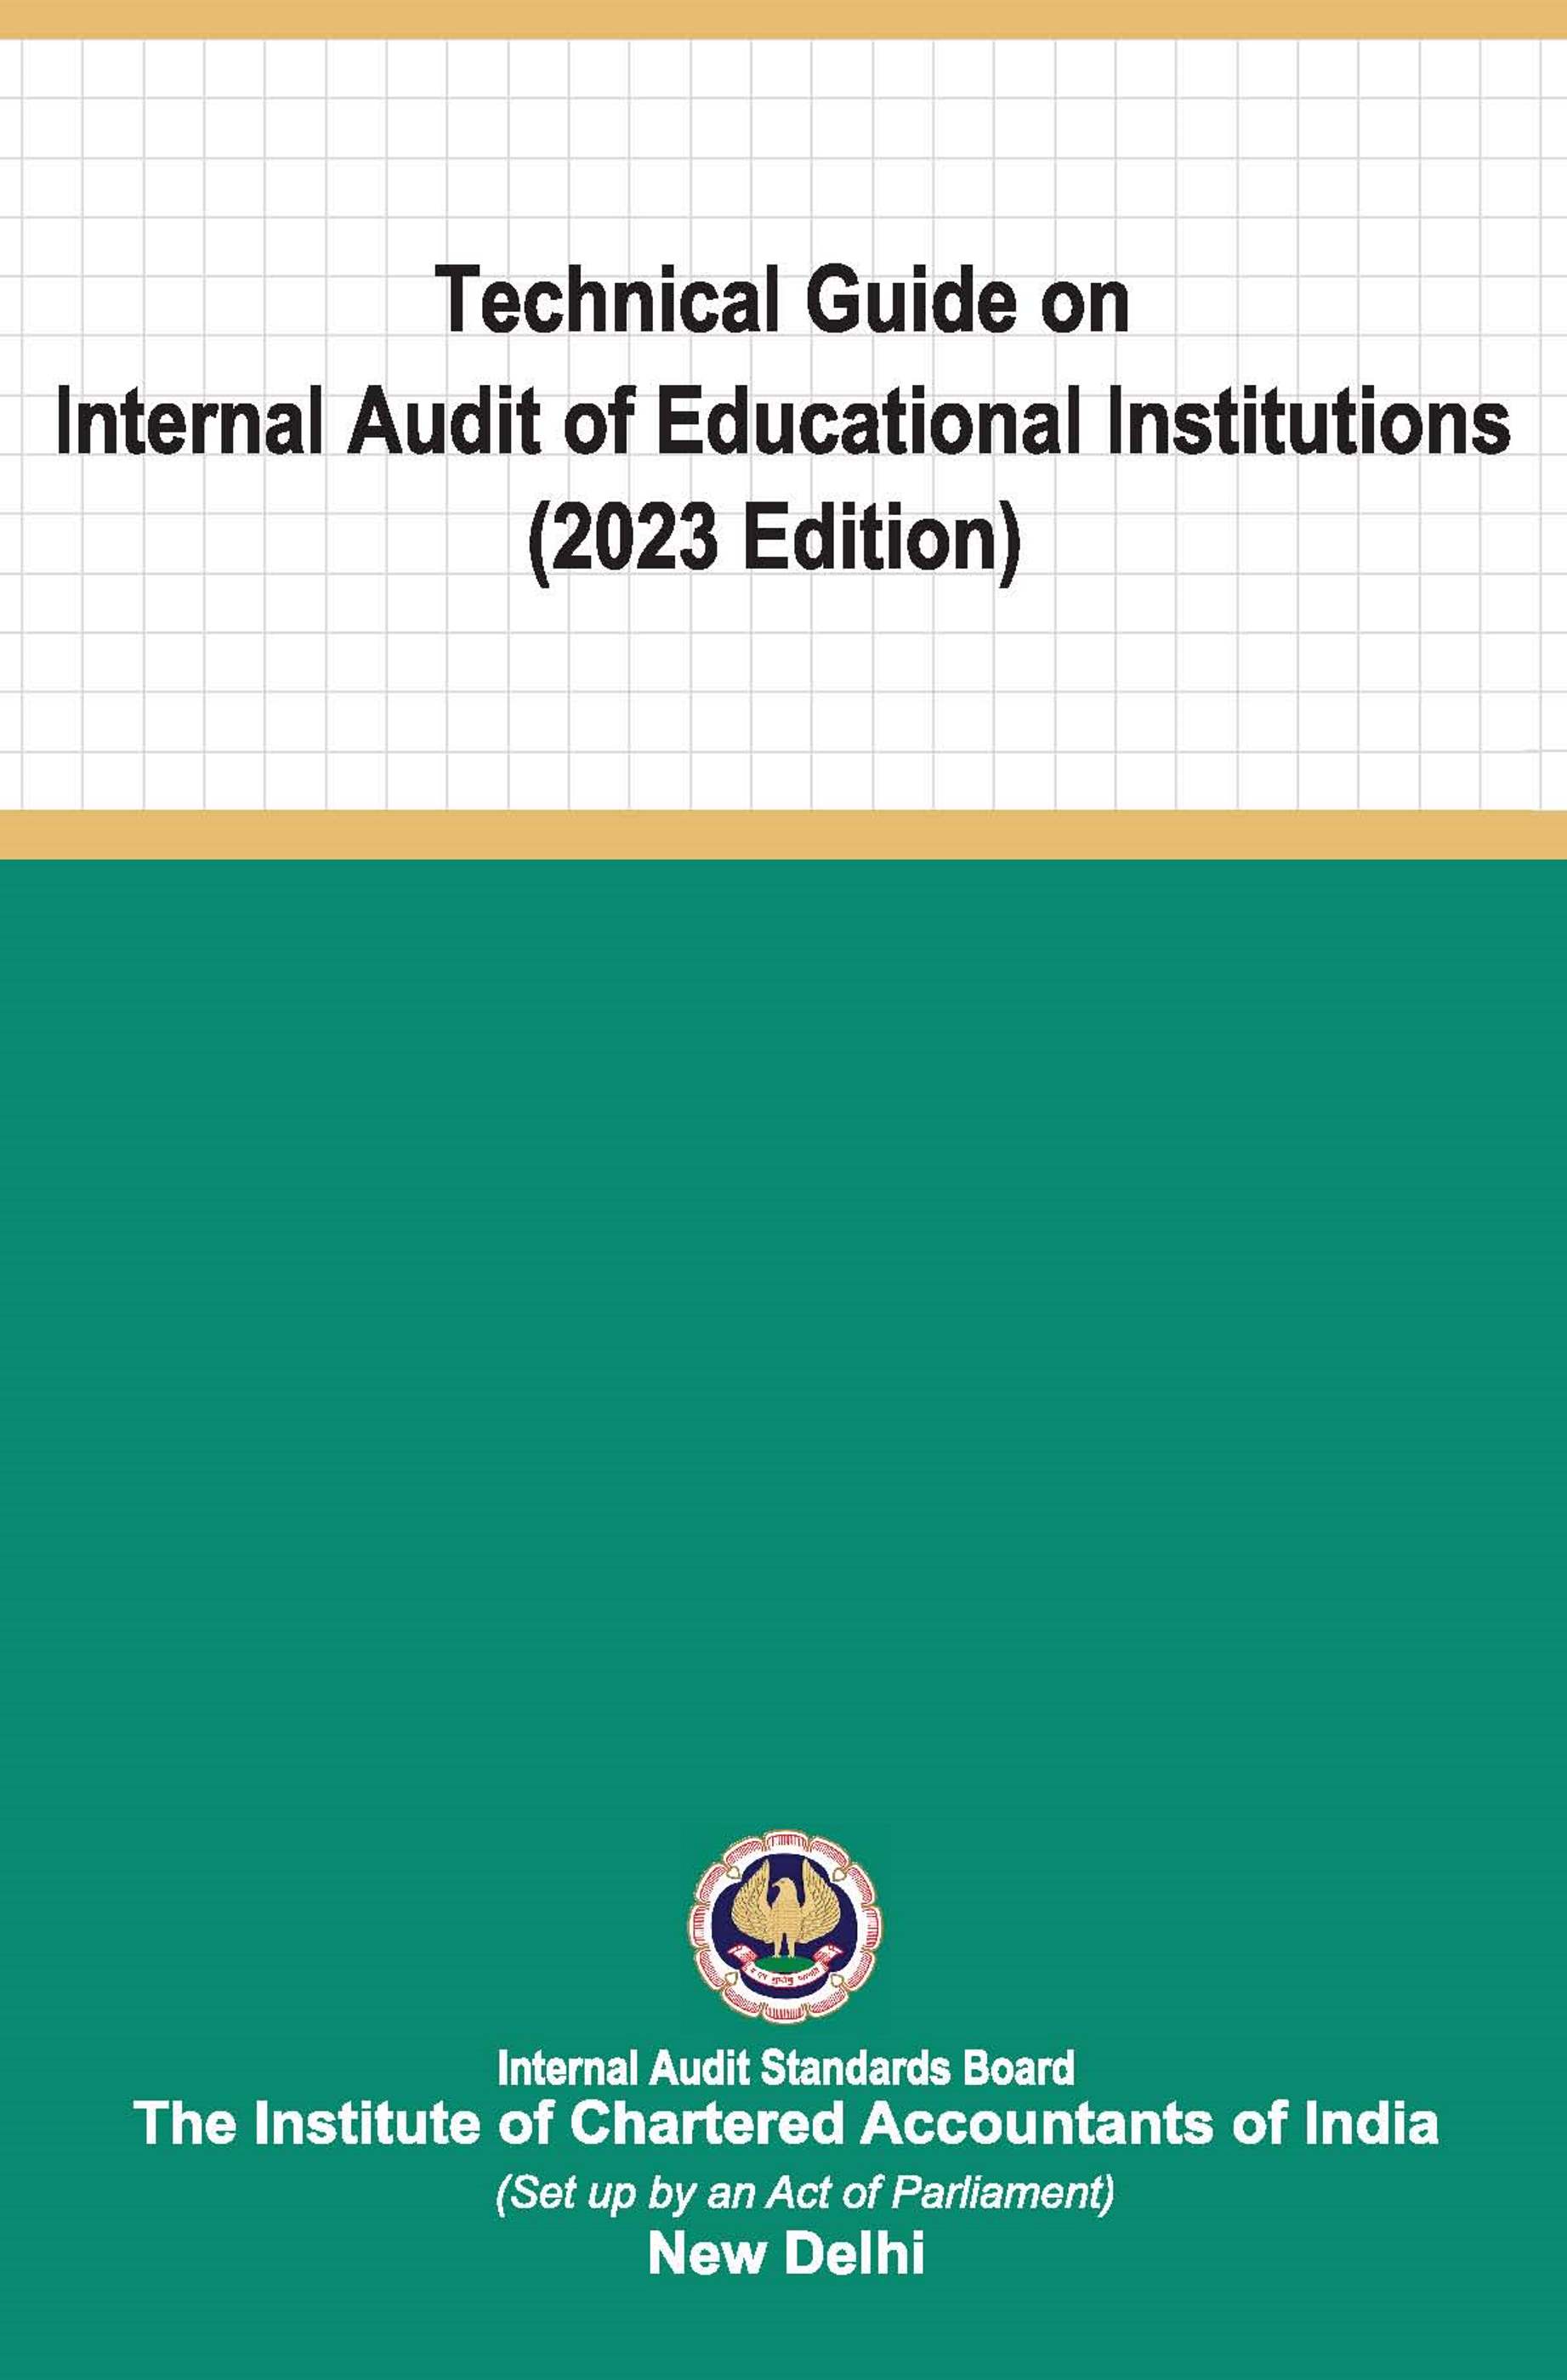 Technical Guide on Internal Audit of Educational Institutions (2023 Edition)